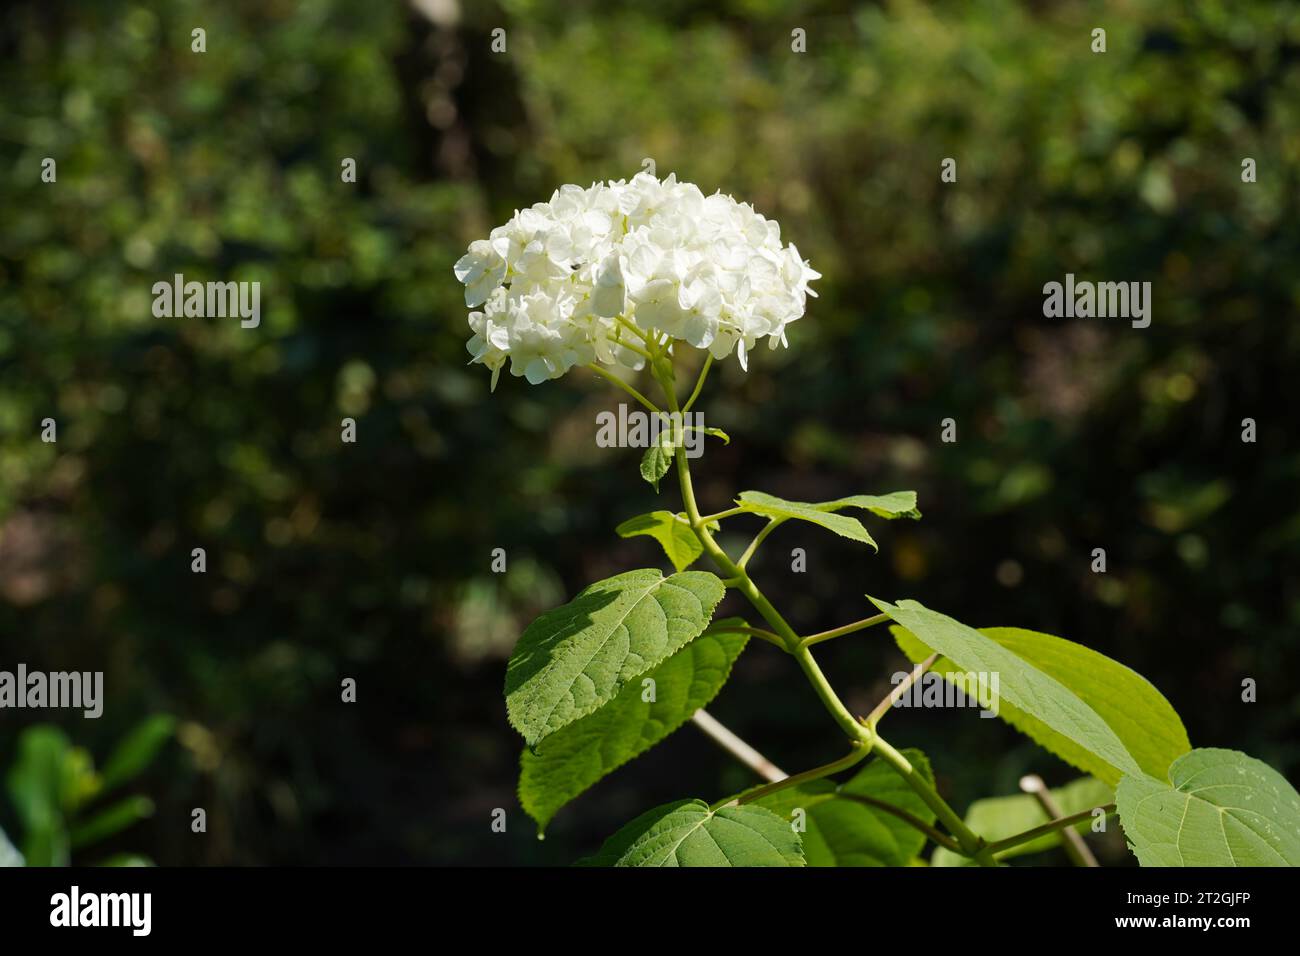 Hydrangea or commonly called Hortensia with white flowers in foreground. A detail of the inflorescence with green leaves around. Stock Photo